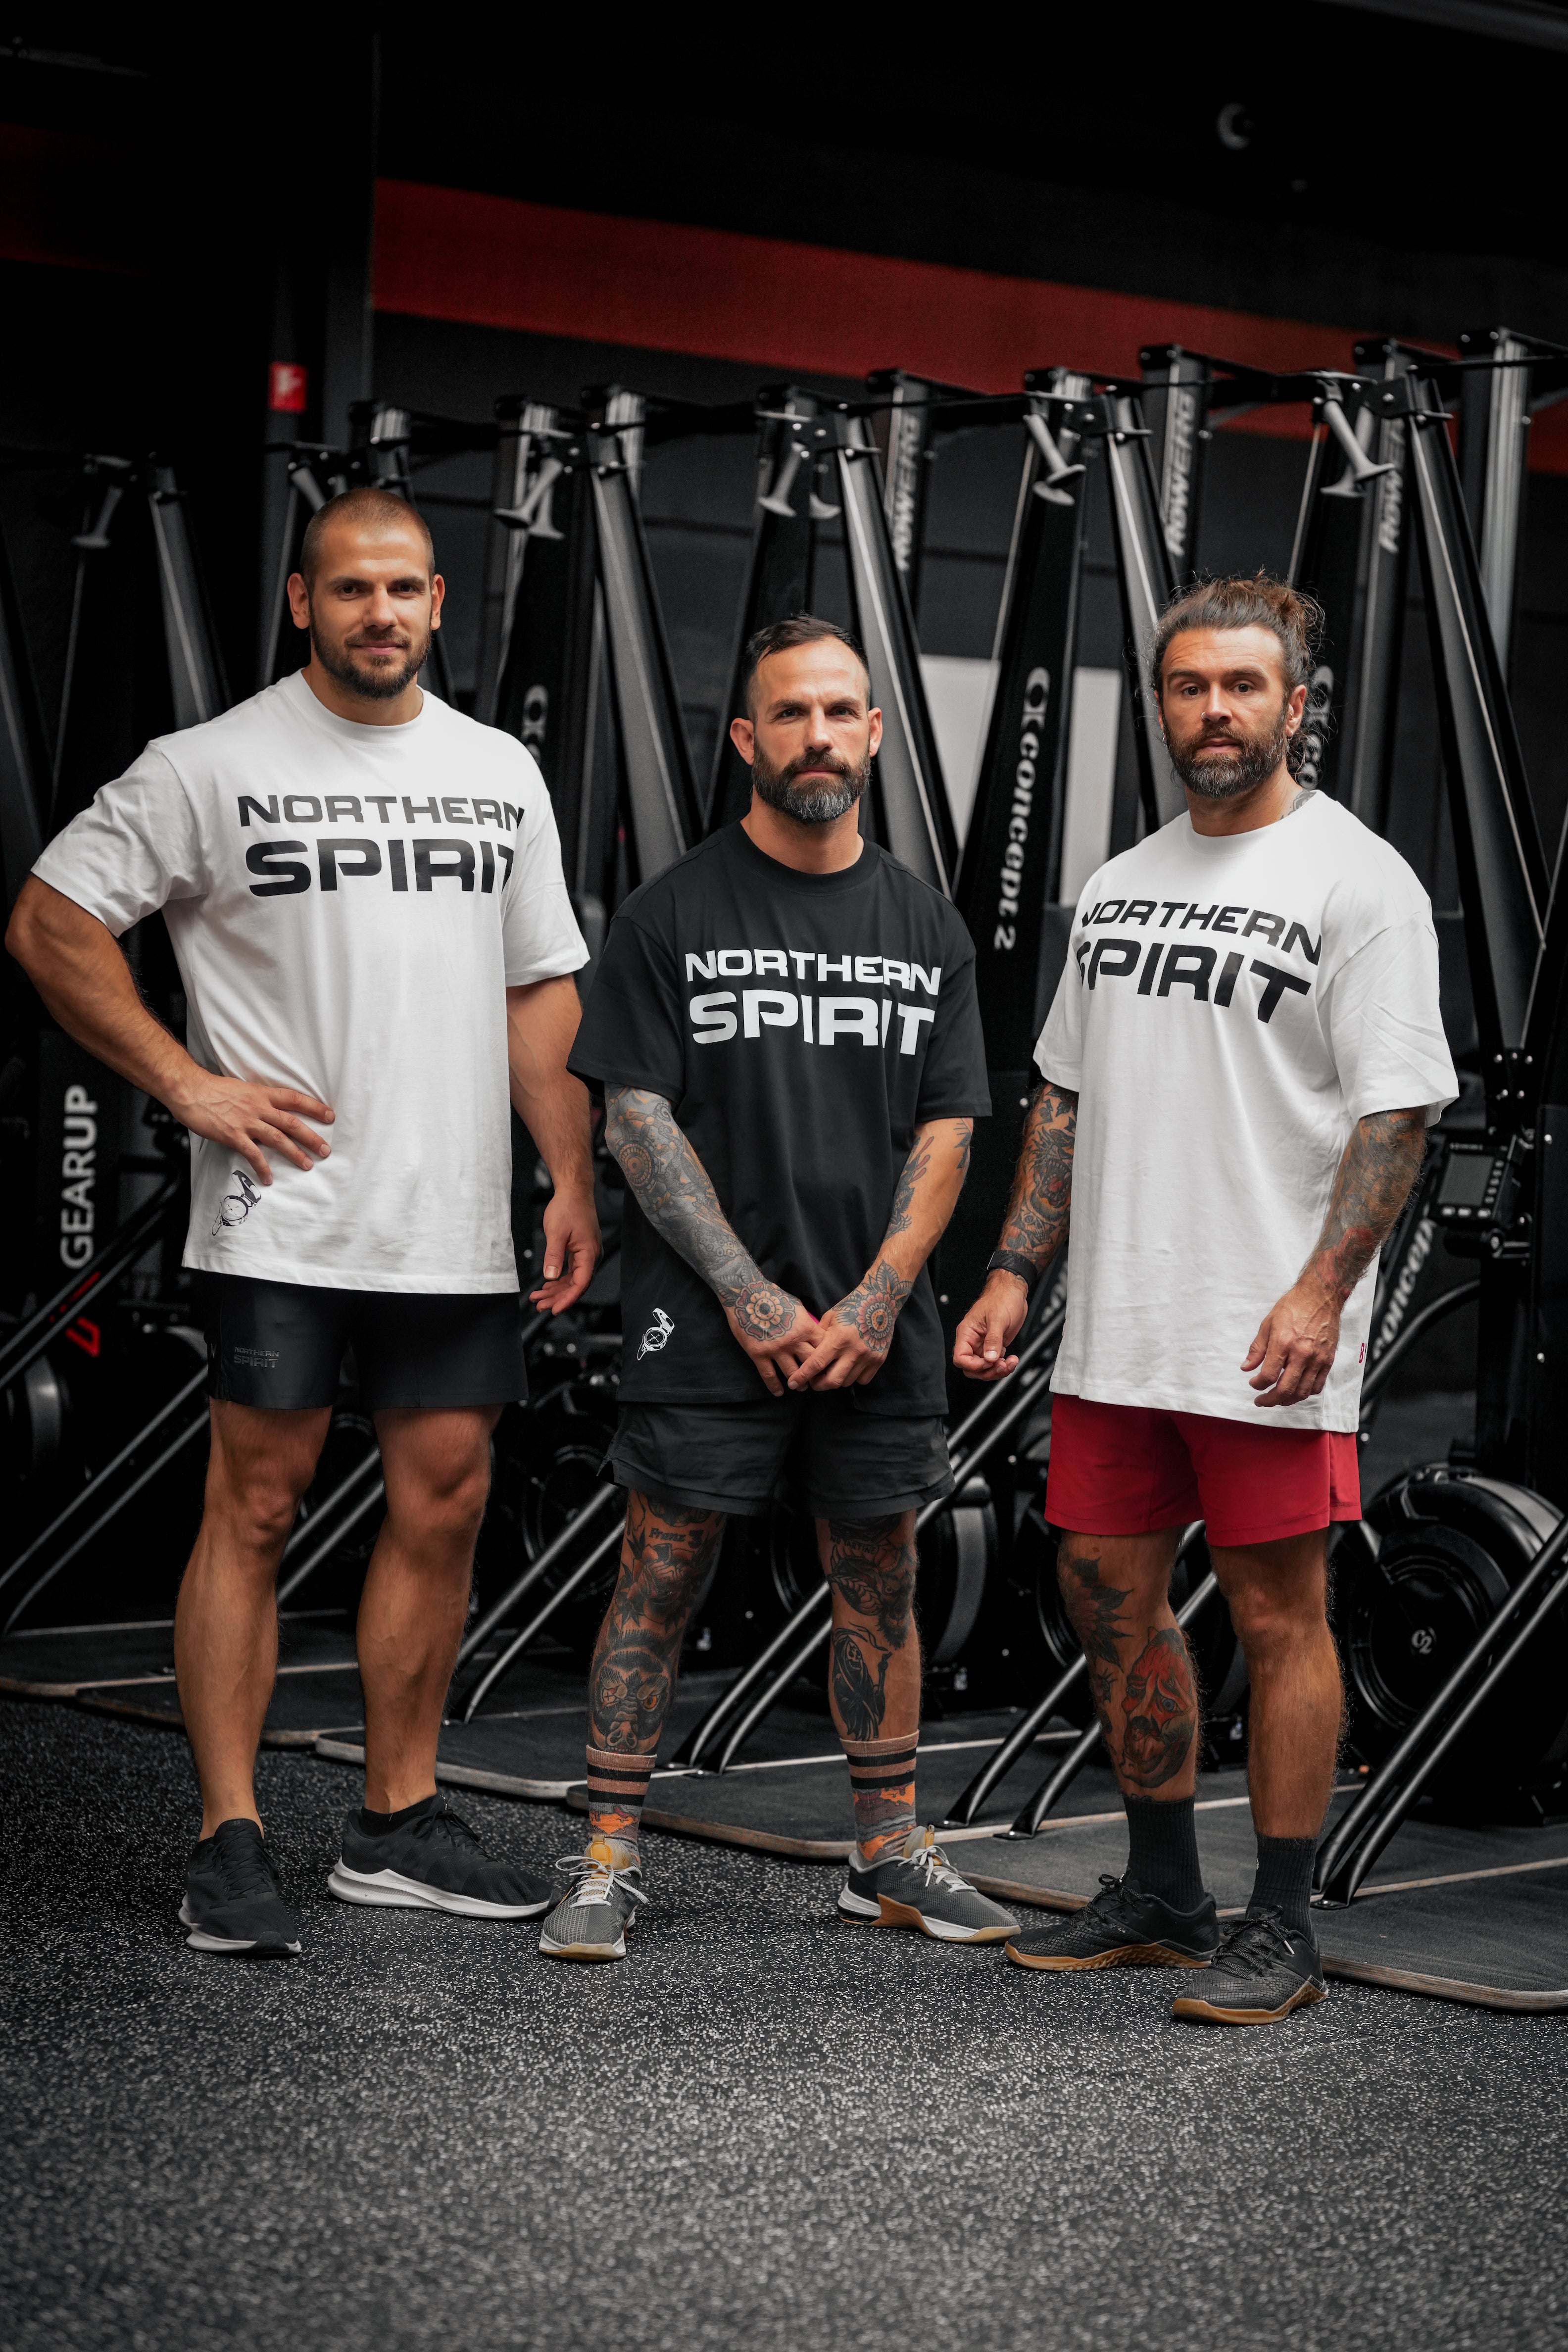 BY SPORT KEEP THE NORTH - BSKN - northern spirit - crossfit - shooting - oversize t-shirt - functional training & fitness clothing brand - Tagline - Crossfit community - 